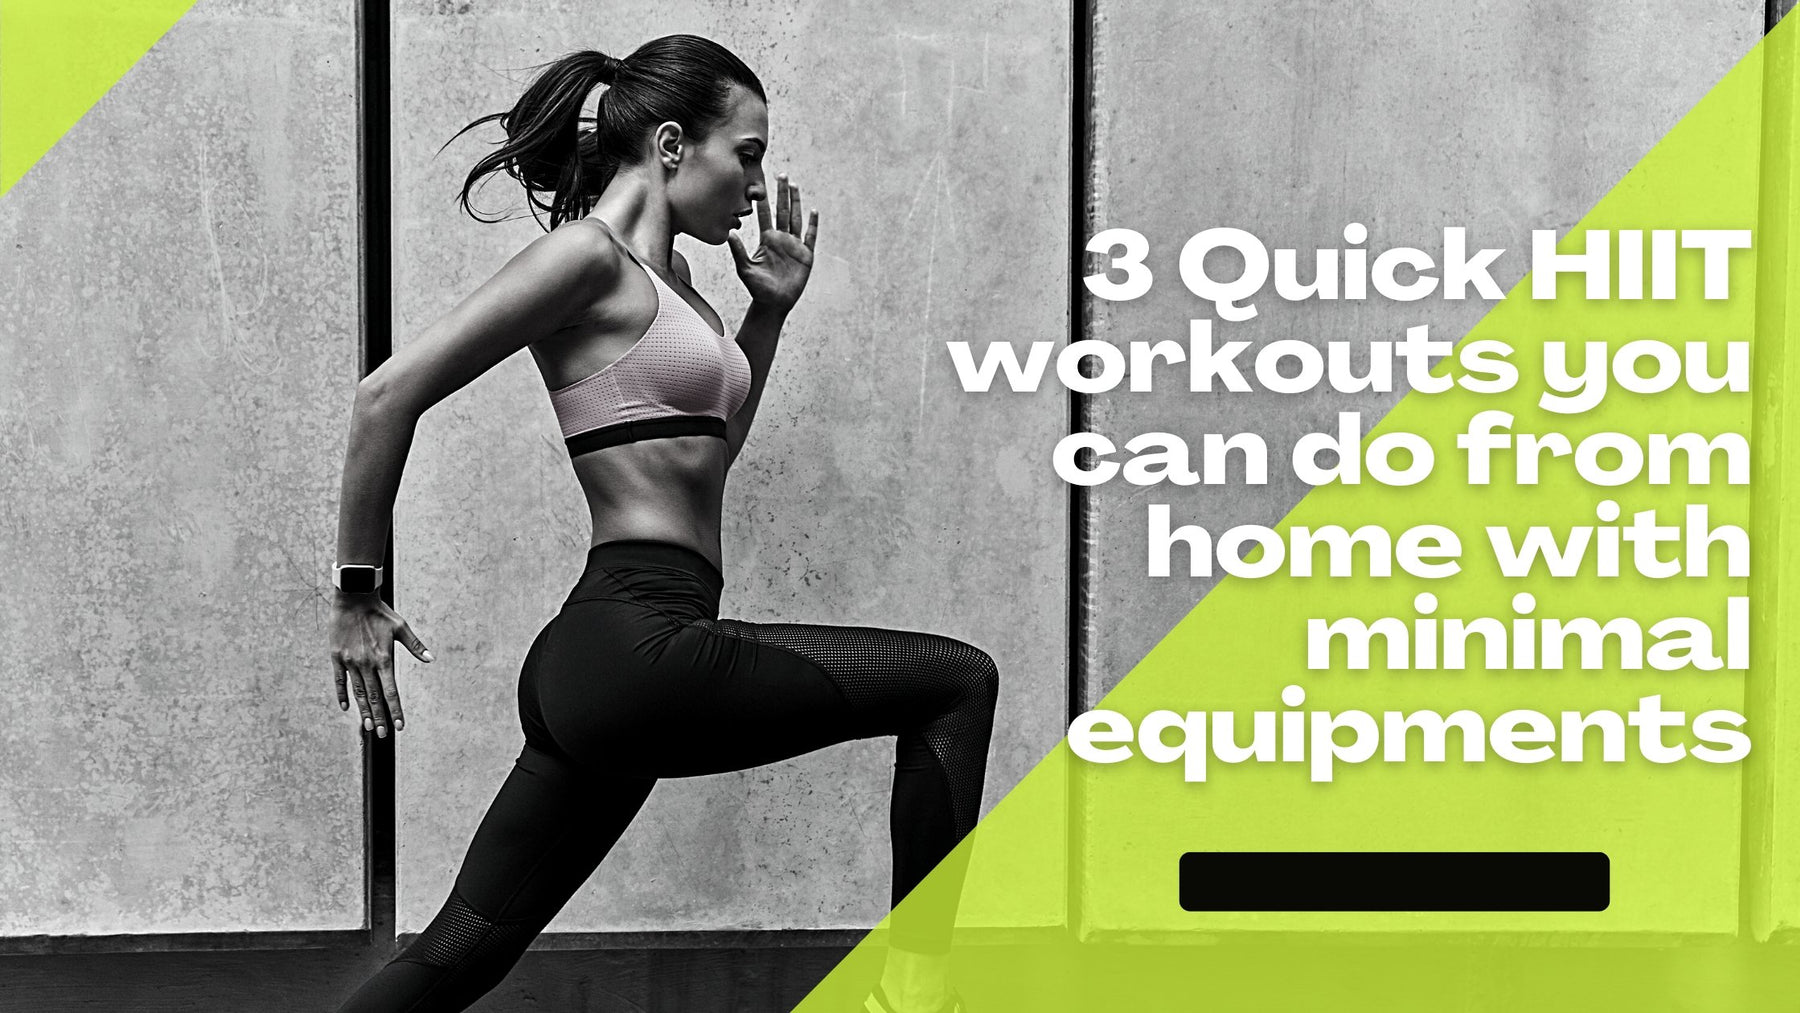 Three quick HIIT workouts you can do from home with minimal equipments. - Roshni Sanghvi